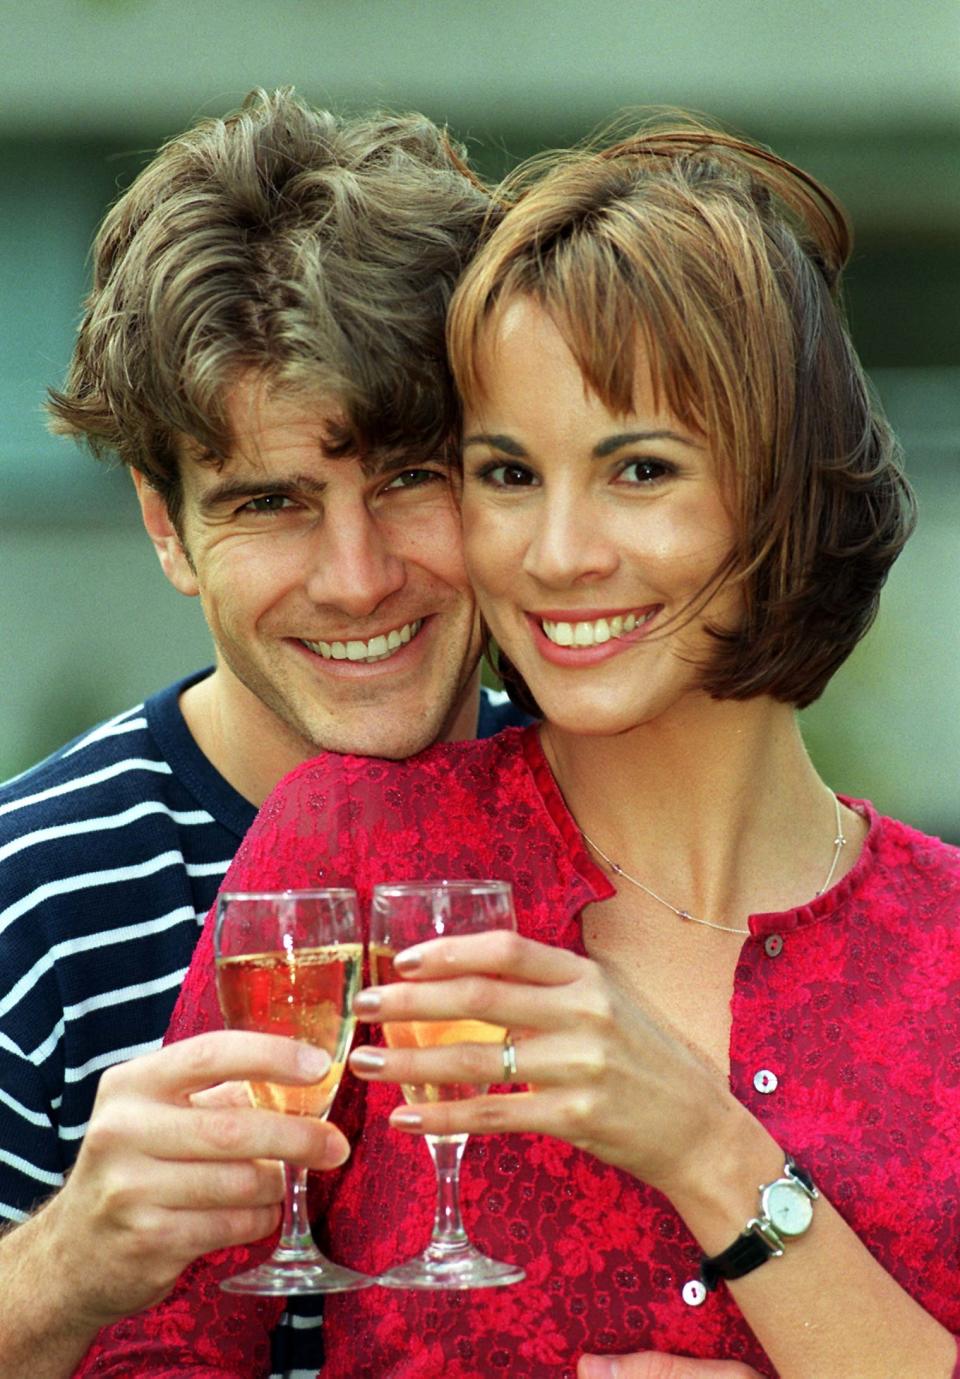 GMTV weather presenter, Andrea McLean, toasts her engagement to BBC researcher Nick Green in London today (Monday). Nick, 28, proposed half way up a mountain in Barcelona last week, and produced a curtain ring to cement their relationship.  *02/11/01 GMTV presenter Andrea McLean and her husband, Nick Green, who have become parents for the first time. Their son, Finlay John Green, was born last Monday, 12 days overdue and weighing in at 8lb 6ozs.